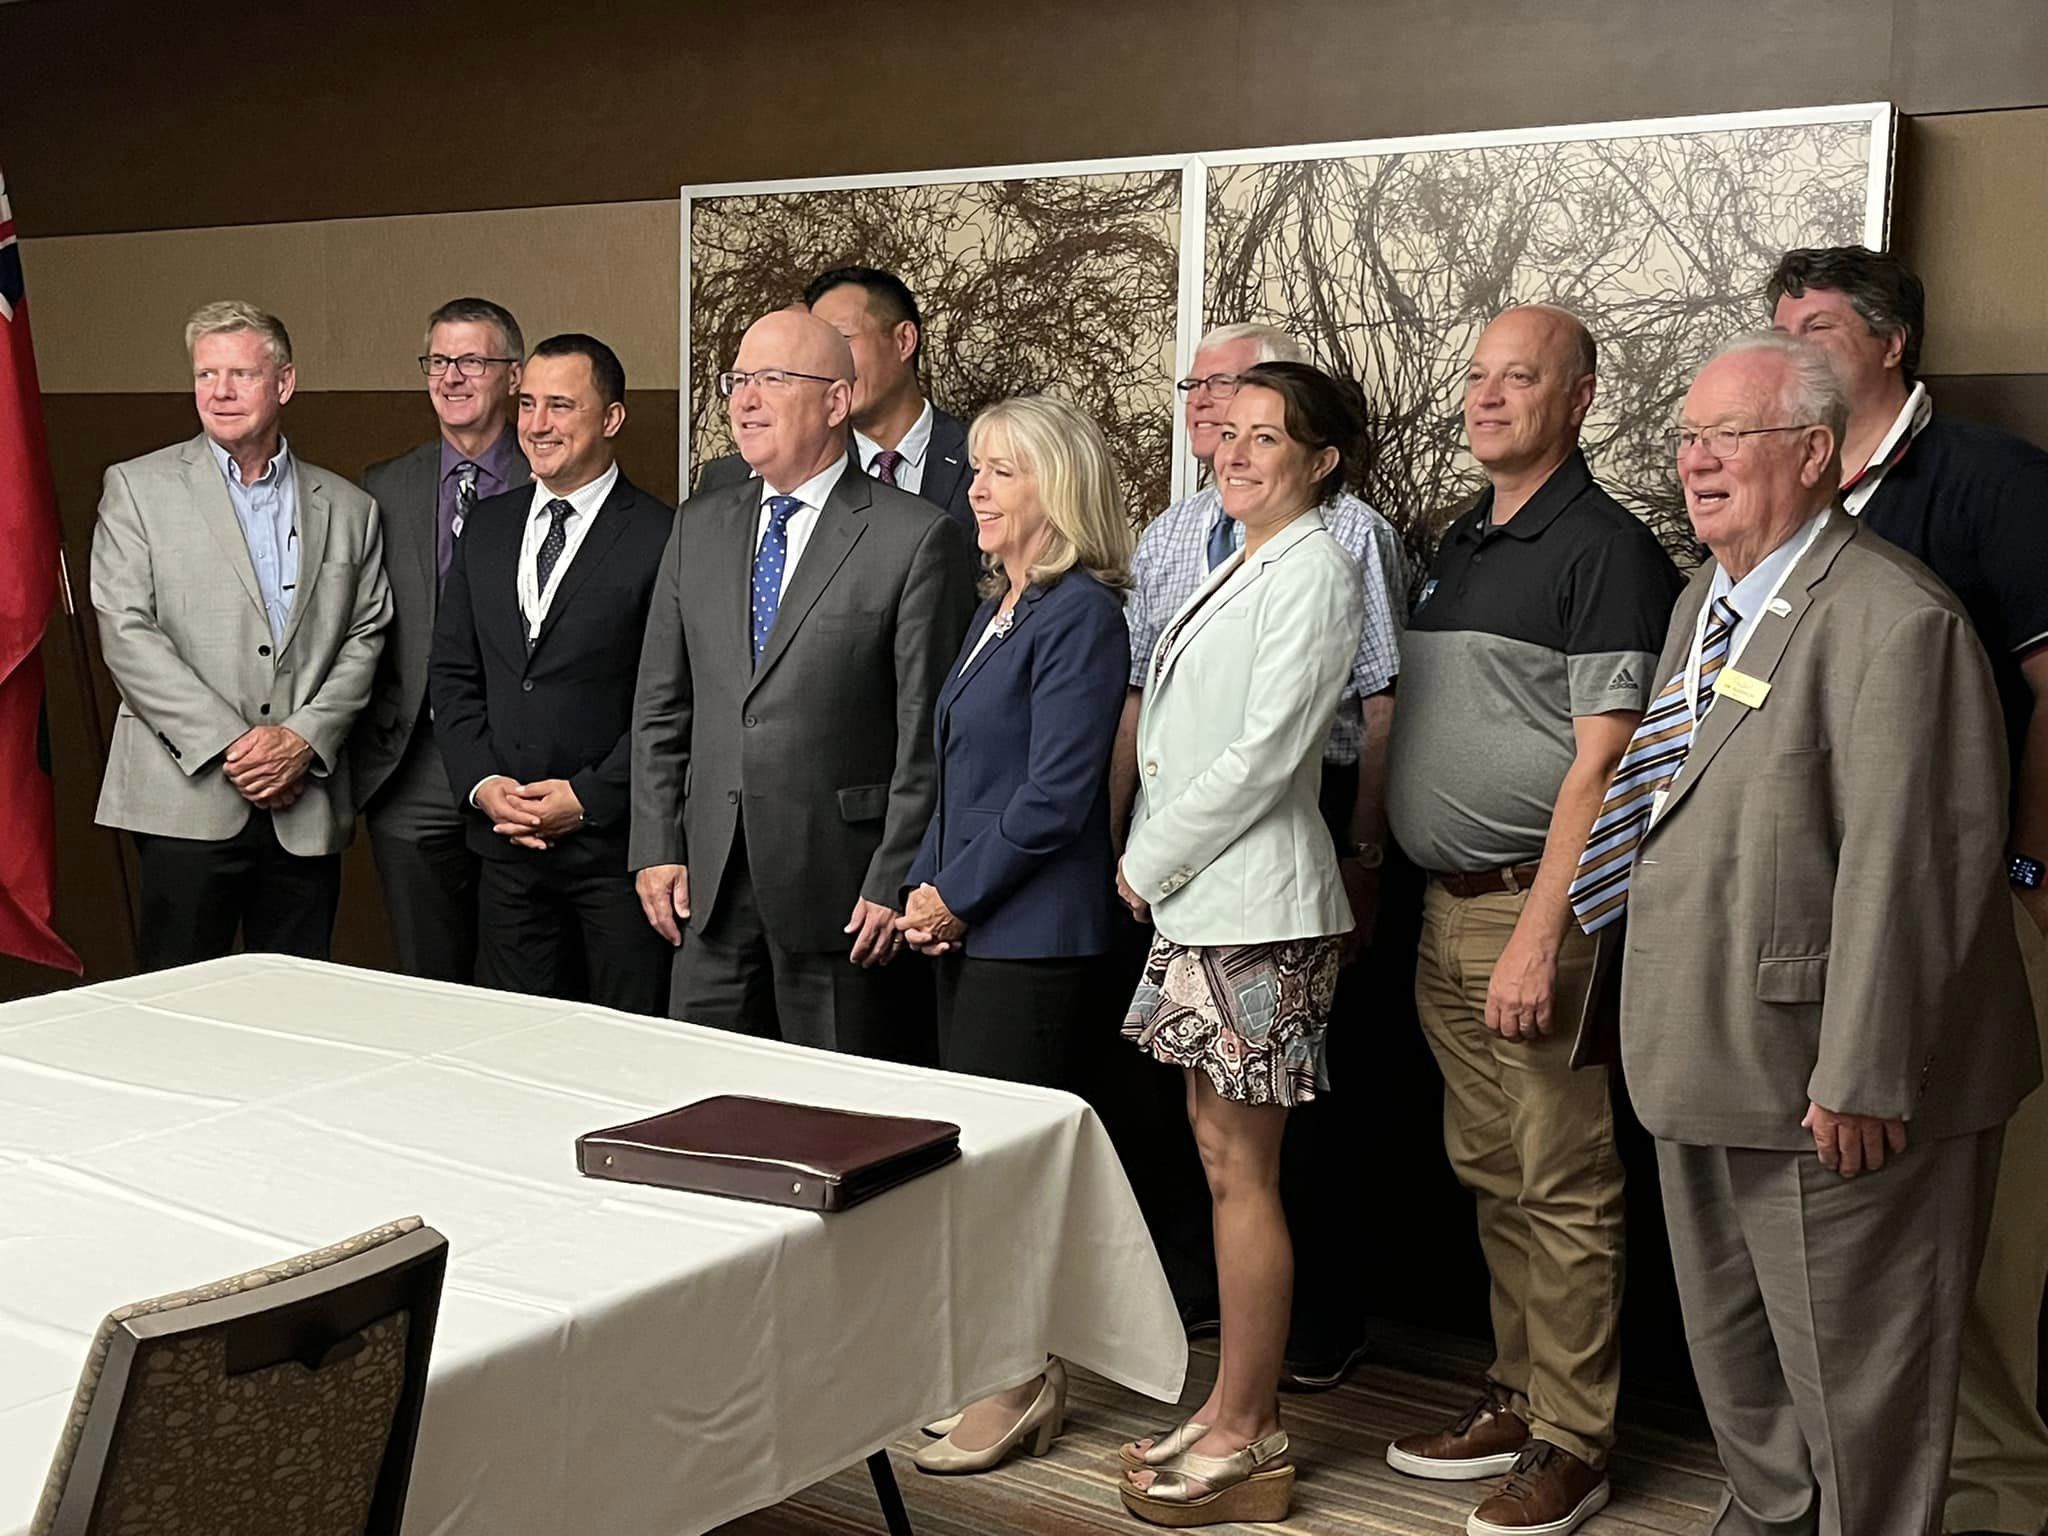 A photo op at the AMO convention featuring MPP Holland, Minister Michael Parsa, Minister Steve Clark, and other dignitaries. The image captures a moment of collaboration and strategic planning for municipal progress and community development.